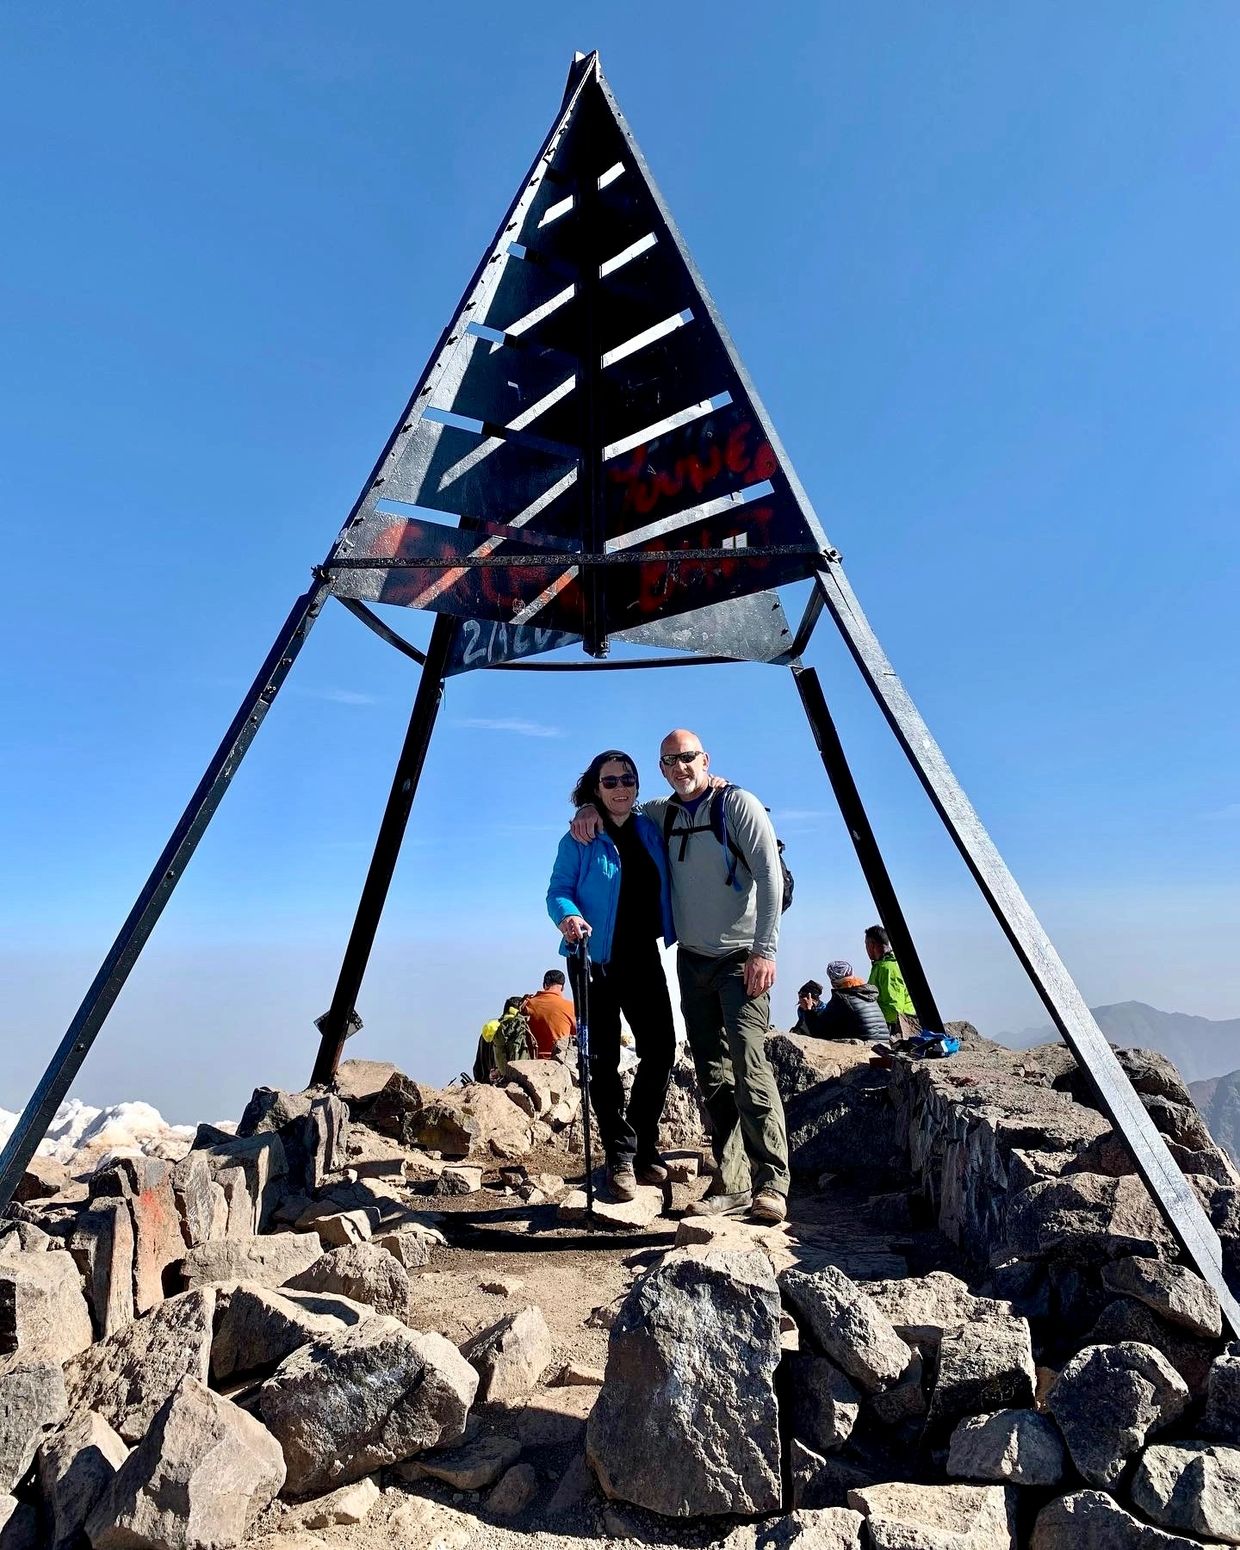  Mt Toubkal (4,167m) in Morocco
Achieving Goals
